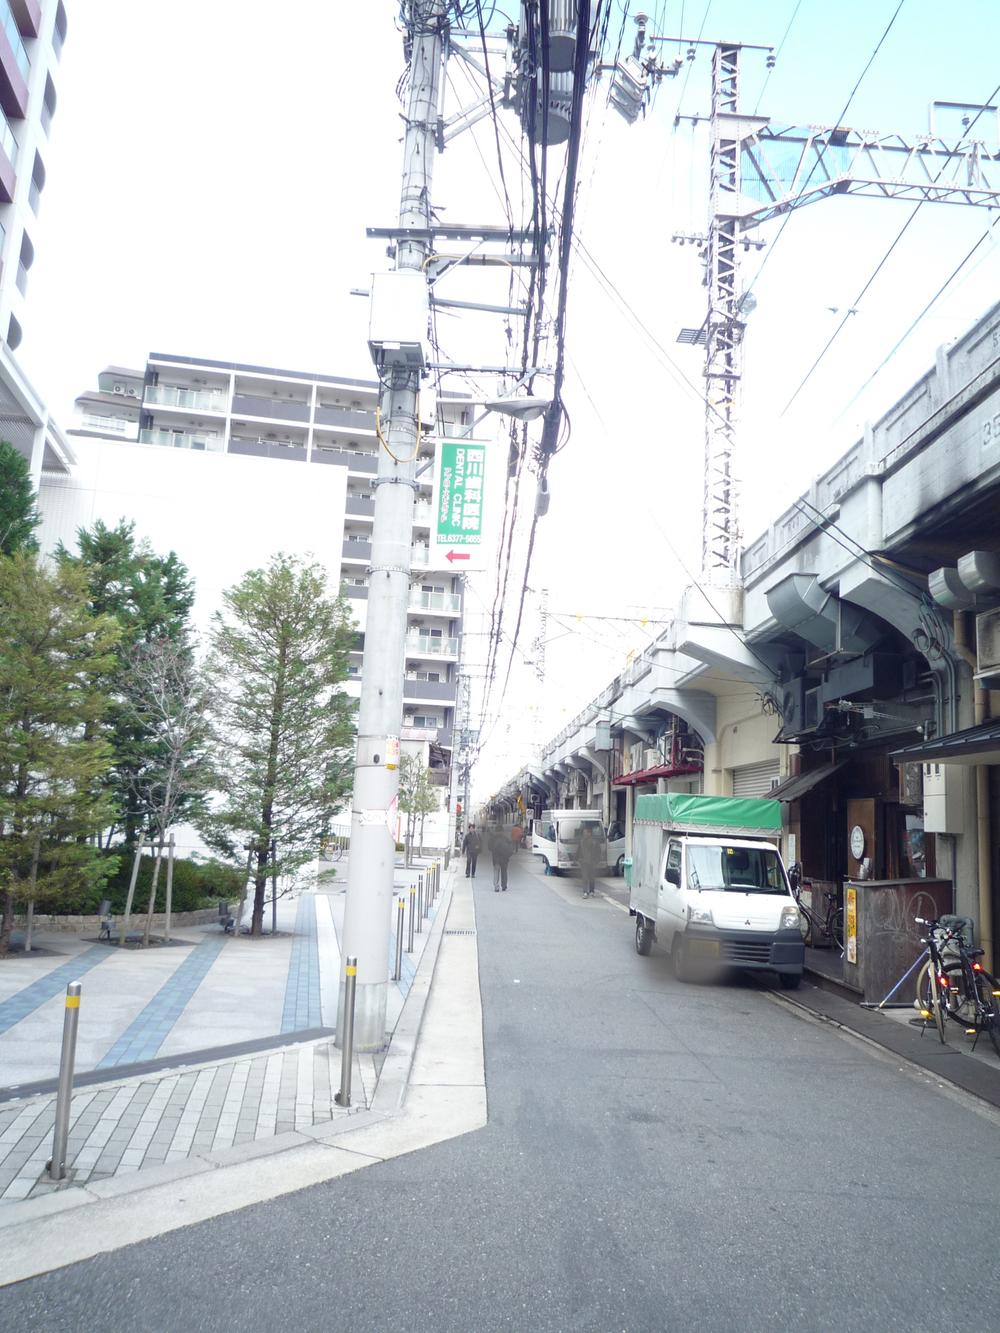 Local appearance photo. The ・ Site of Umeda Tower ・ The east side of the road ・ Line is the part.